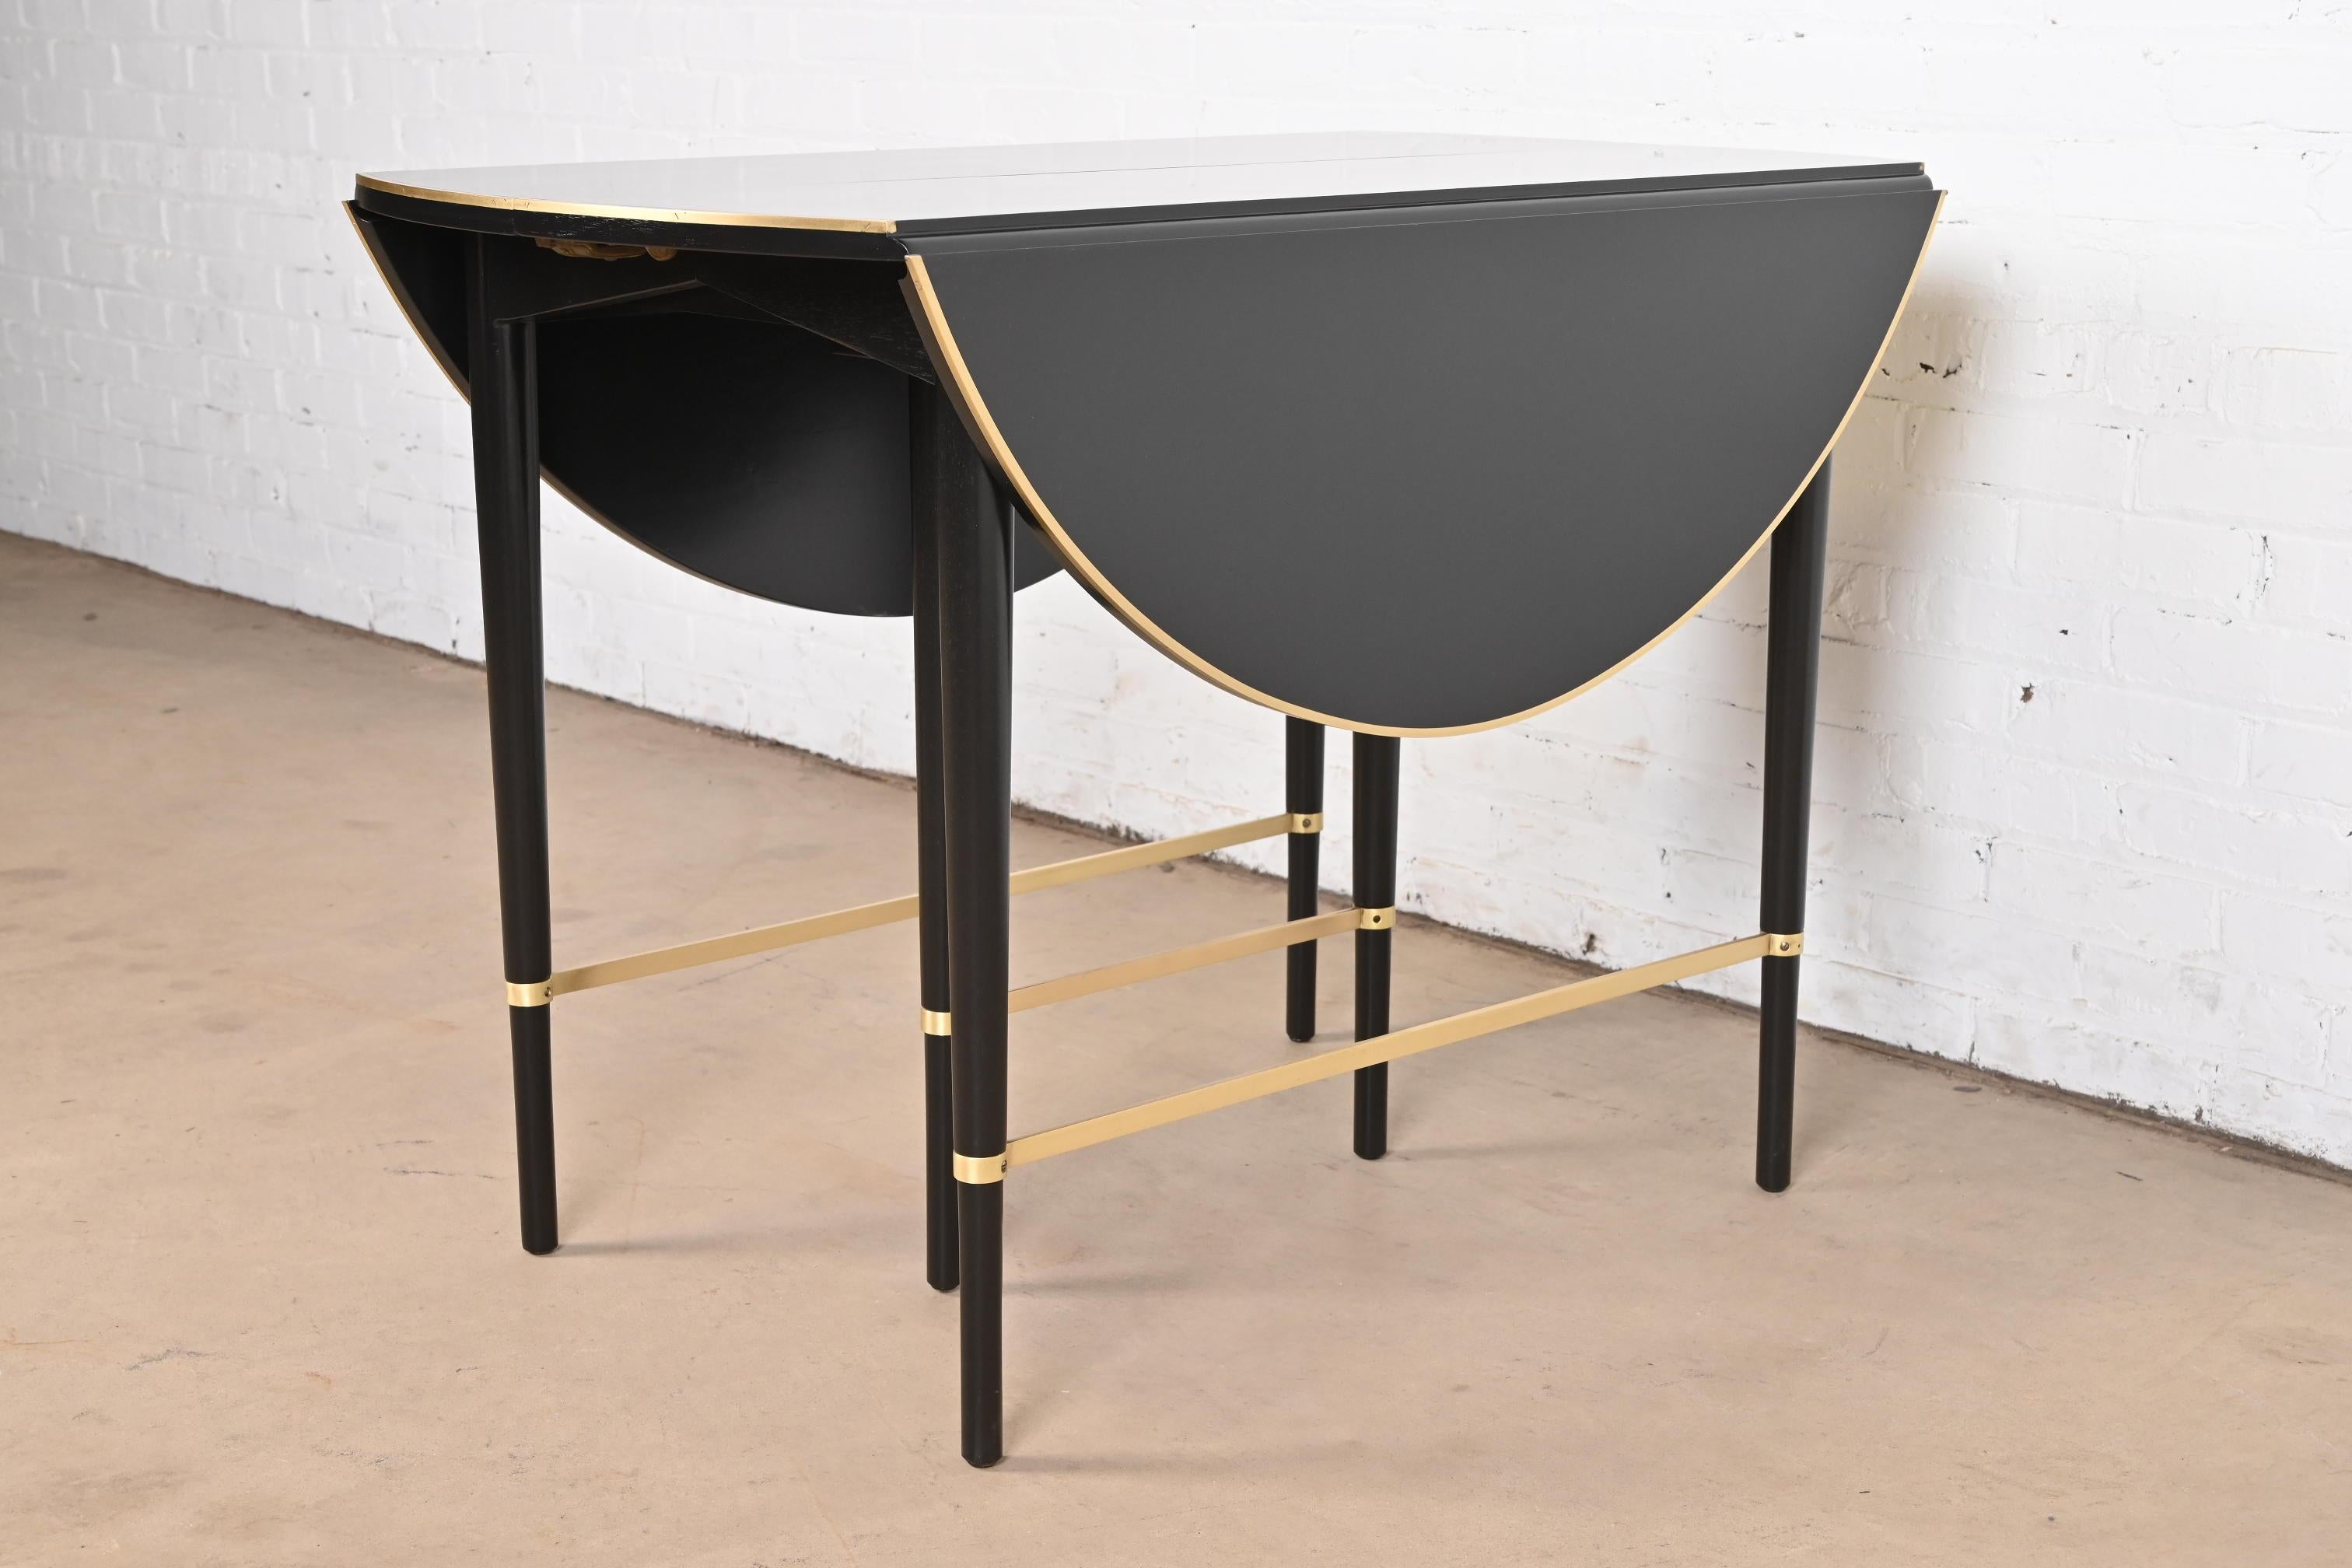 Paul McCobb Connoisseur Collection Black Lacquer Brass Dining Table, Refinished For Sale 8